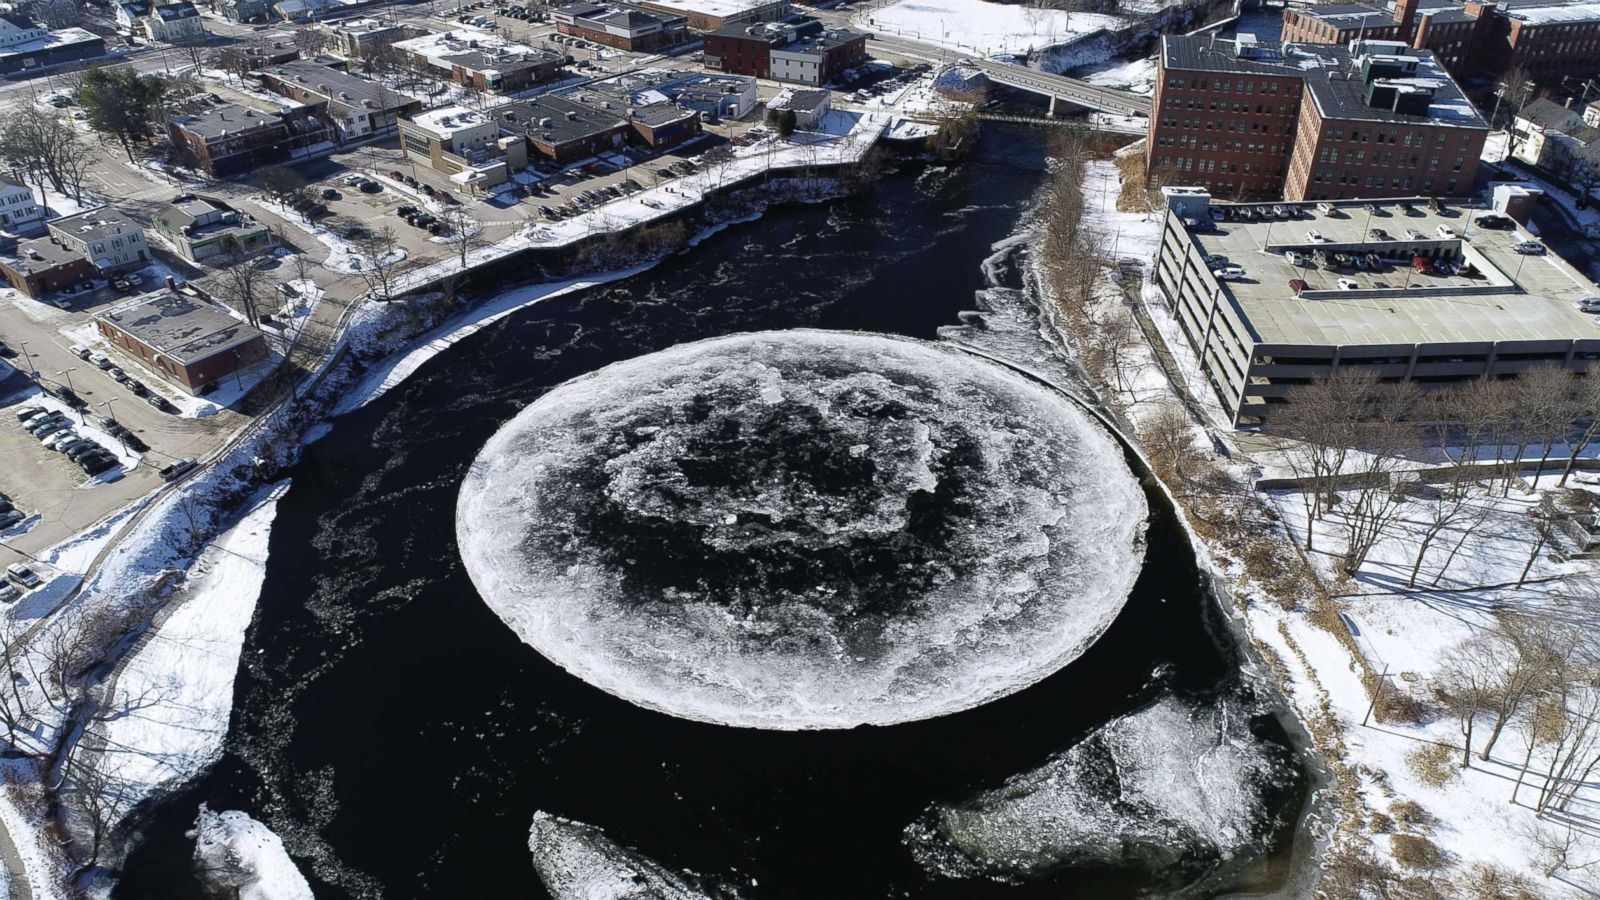 Heres what causes giant spinning ice discs like the one in Maine